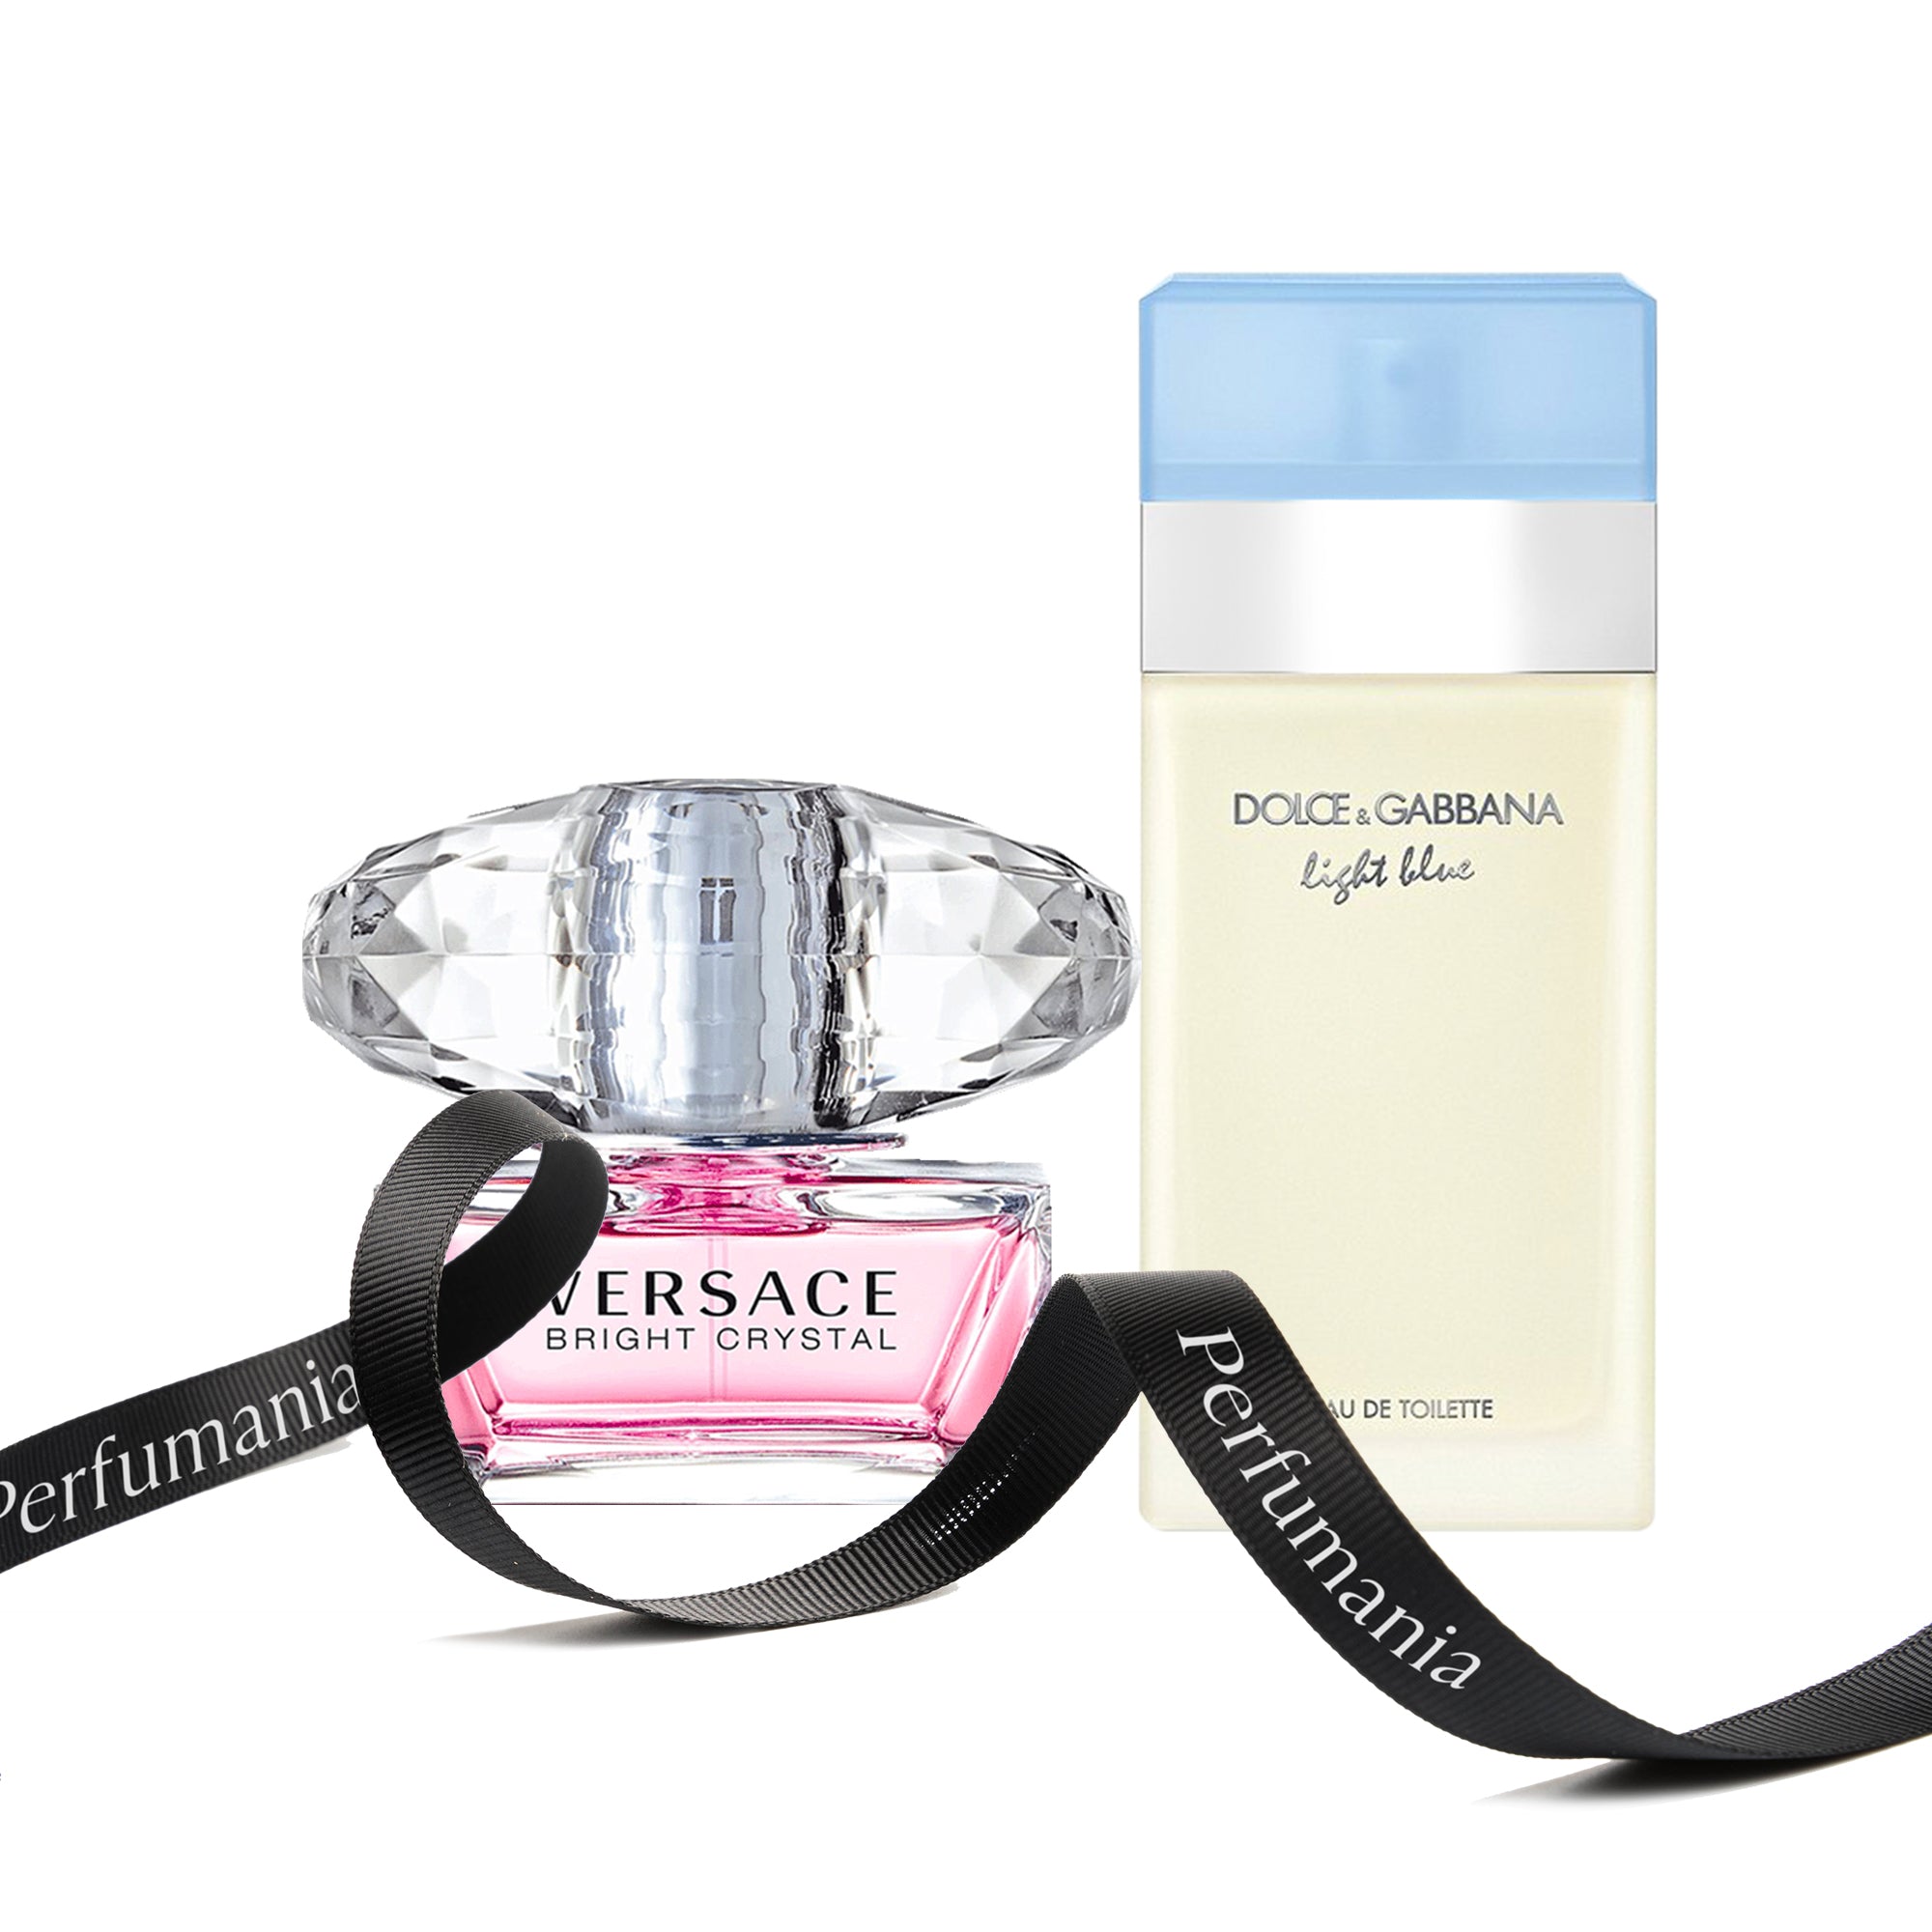 Bundle for Women: Bright Crystal by Versace and Light Blue by D&G Featured image